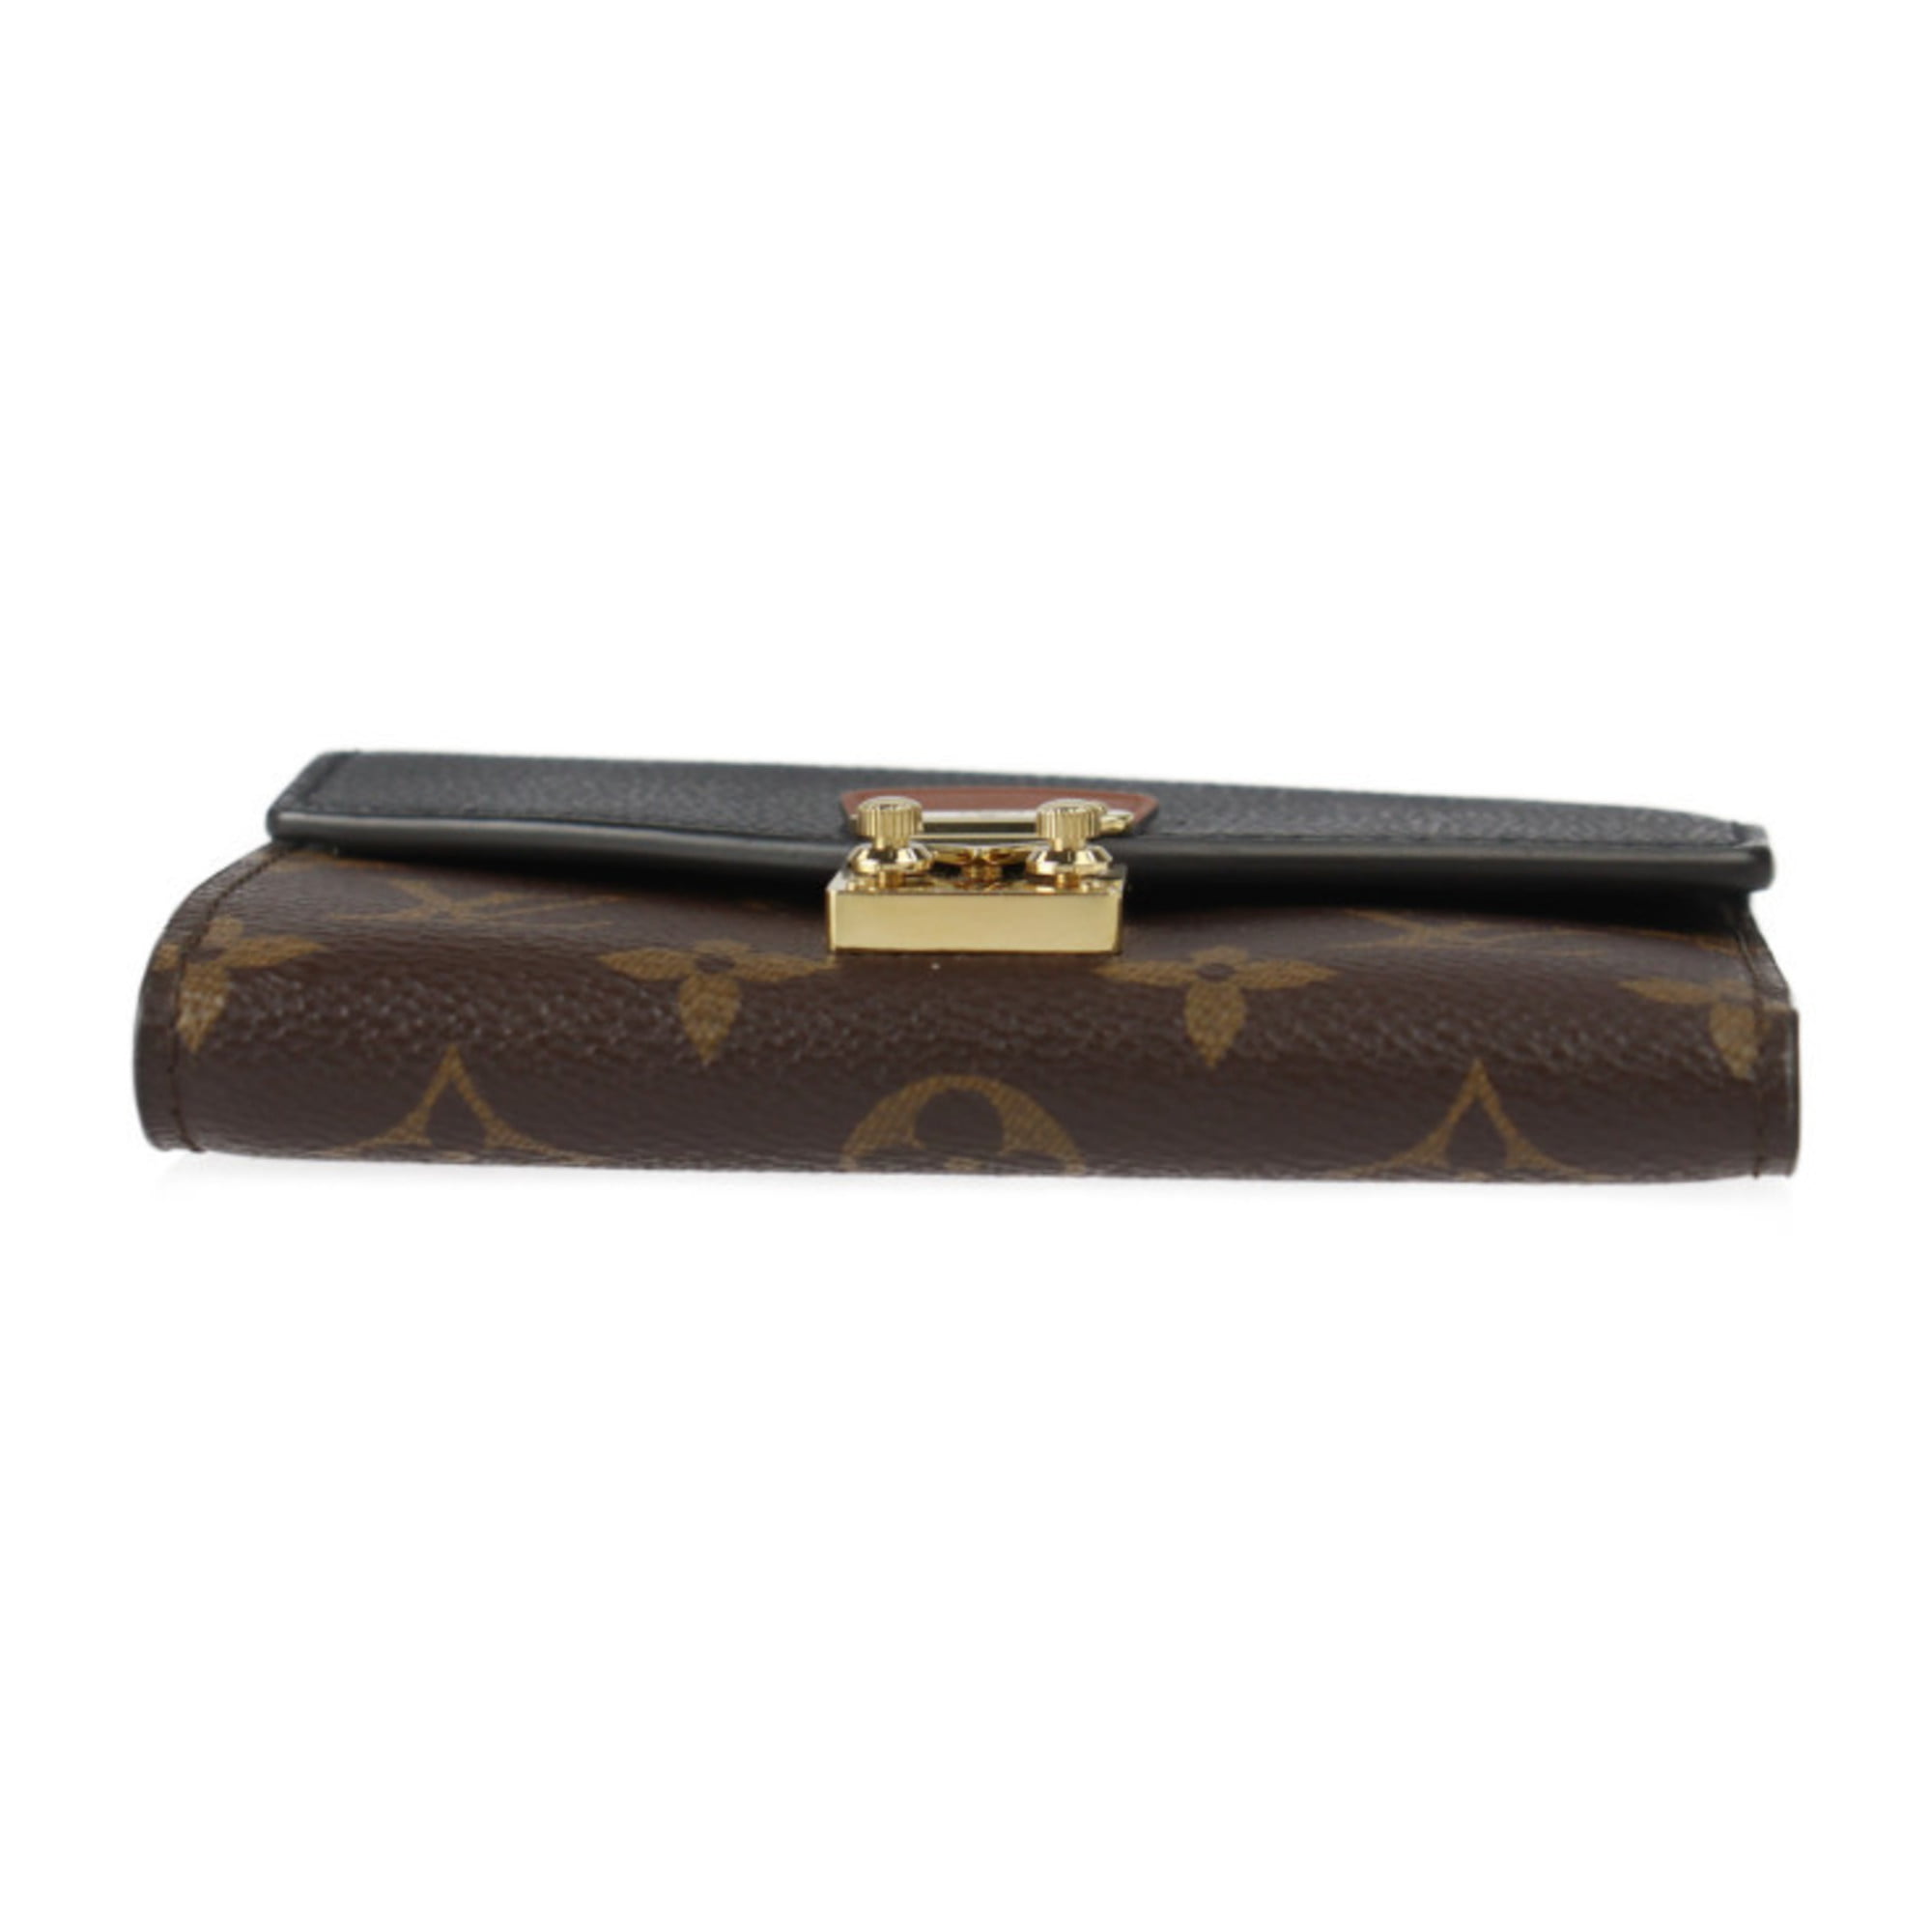 Pre-Owned LOUIS VUITTON Louis Vuitton Portefeuille Palace Compact Trifold  Wallet M67479 Monogram Canvas Leather Brown Black Gold Metal Fittings  (Good) 